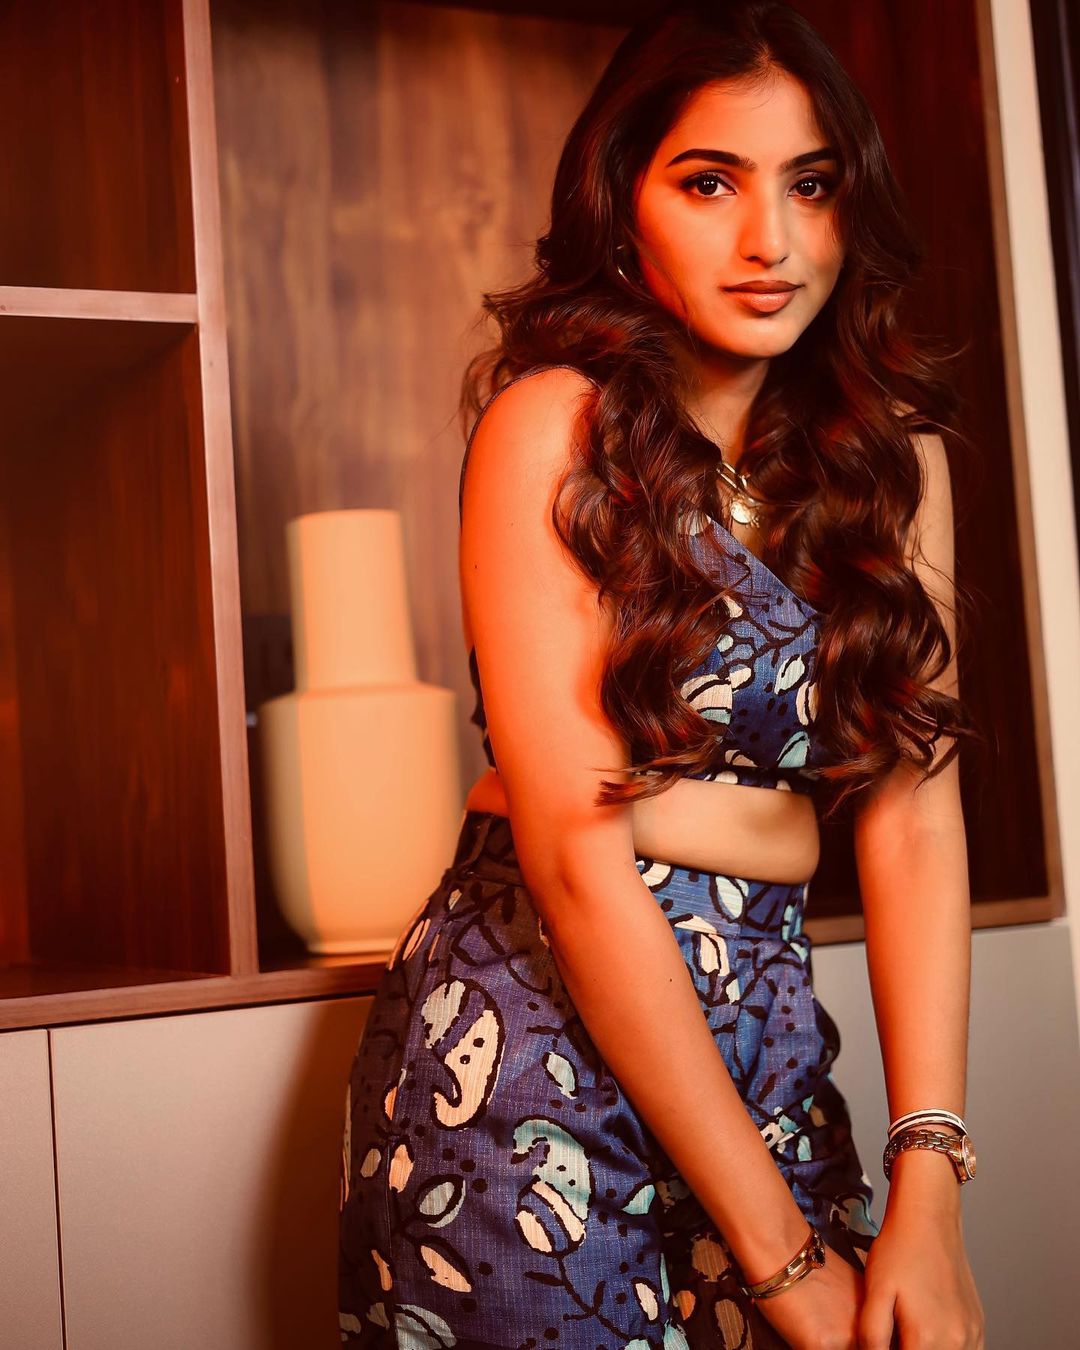 Actress pranavi manukonda melts our hearts with fashion looks-Actresspranavi Photos,Spicy Hot Pics,Images,High Resolution WallPapers Download